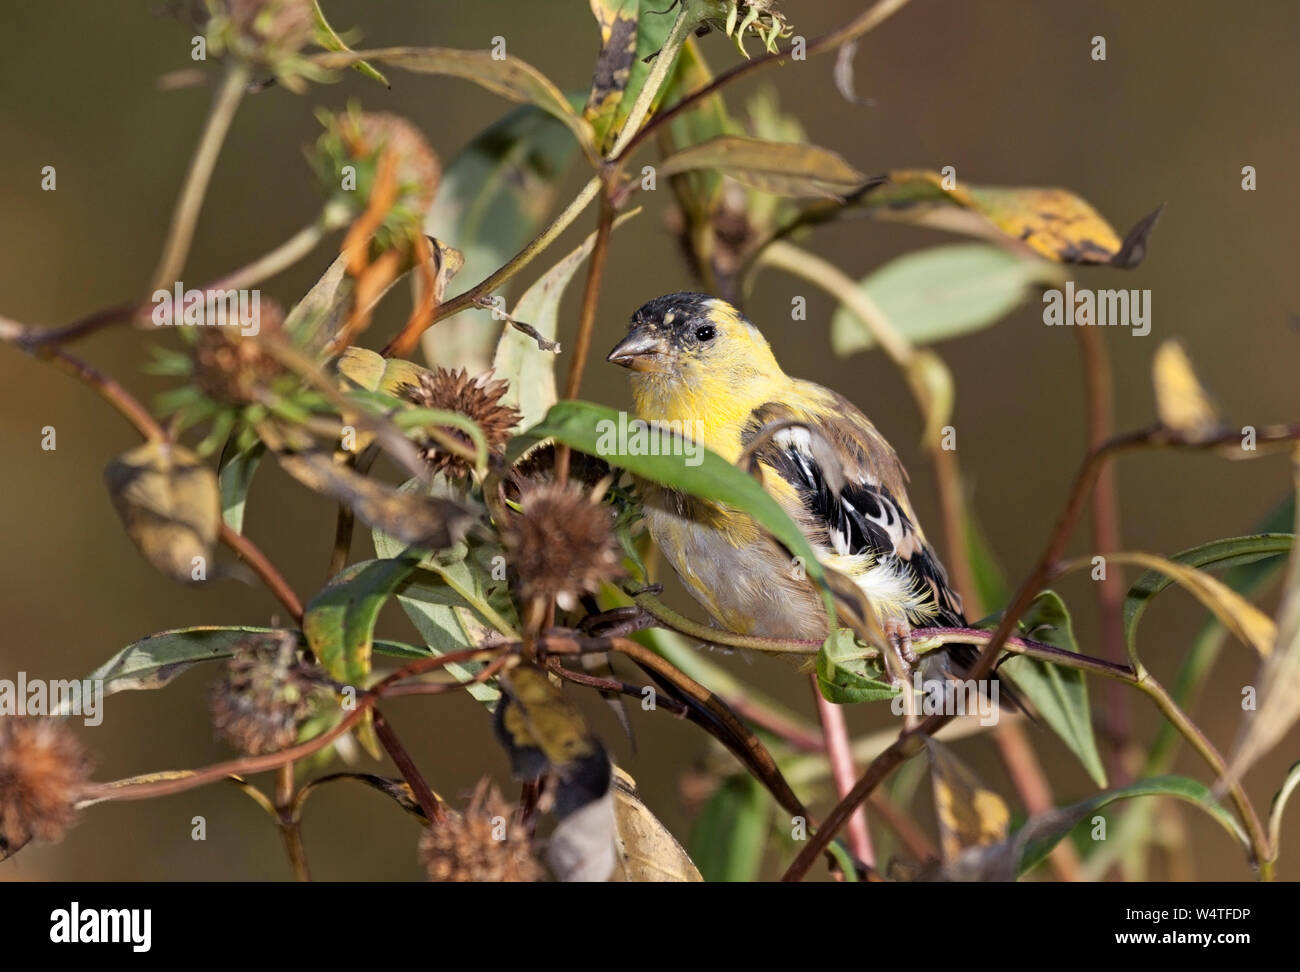 A goldfinch hids in a patch of intertwined dying sunflowers while eating its seeds. Stock Photo